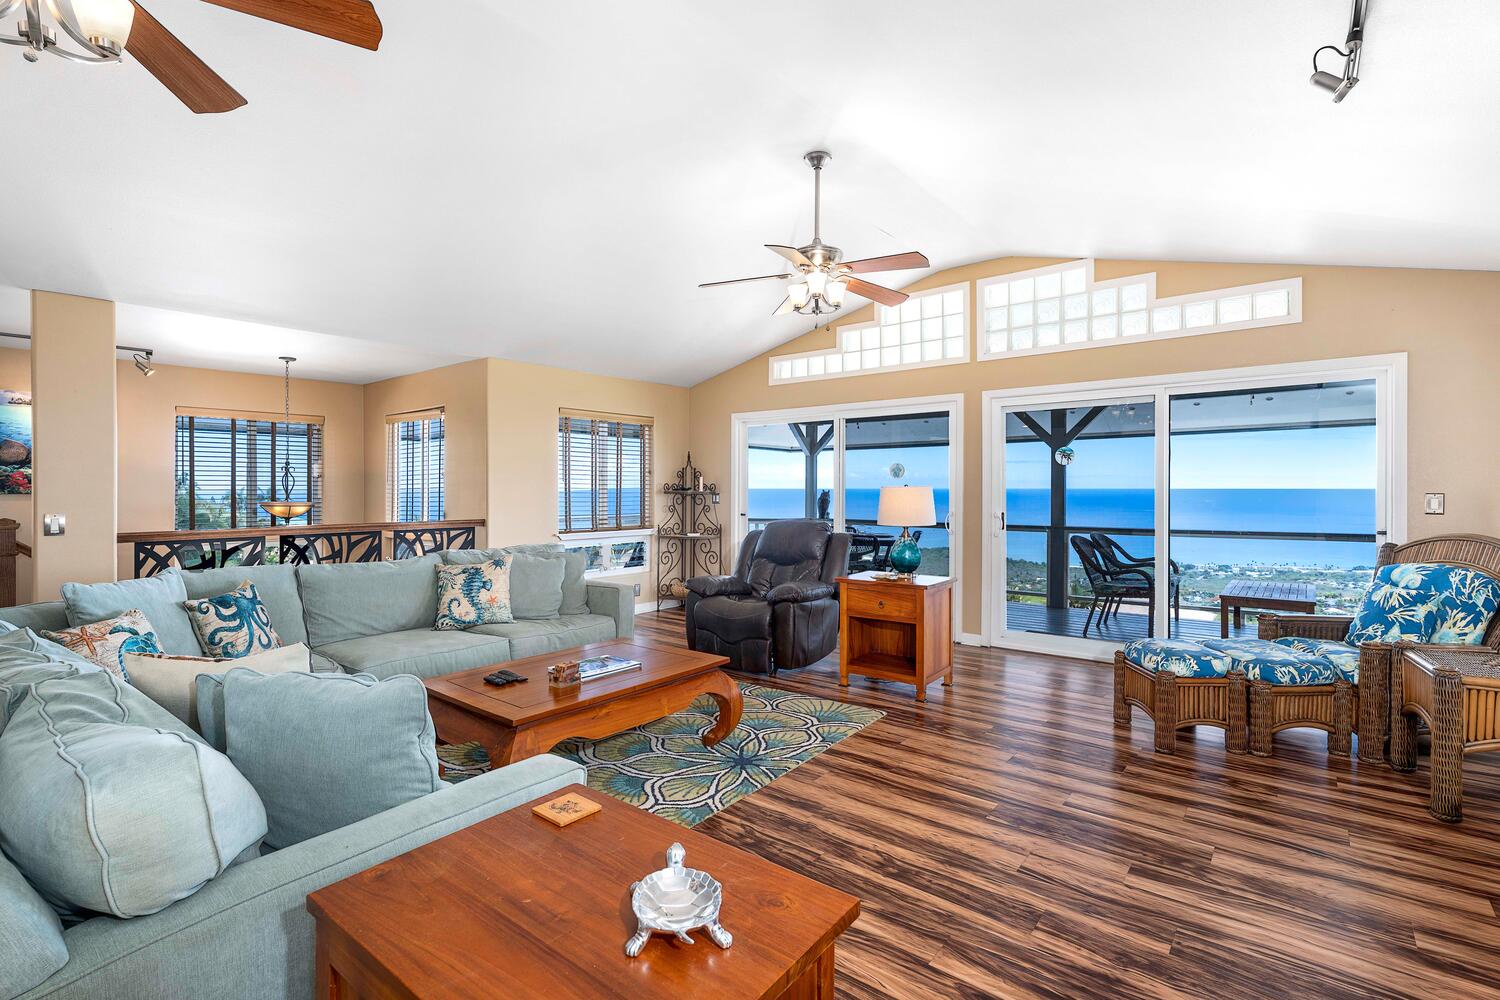 Kailua Kona Vacation Rentals, Honu O Kai (Turtle of the Sea) - Savor the ocean views from almost every room of your home away from home.